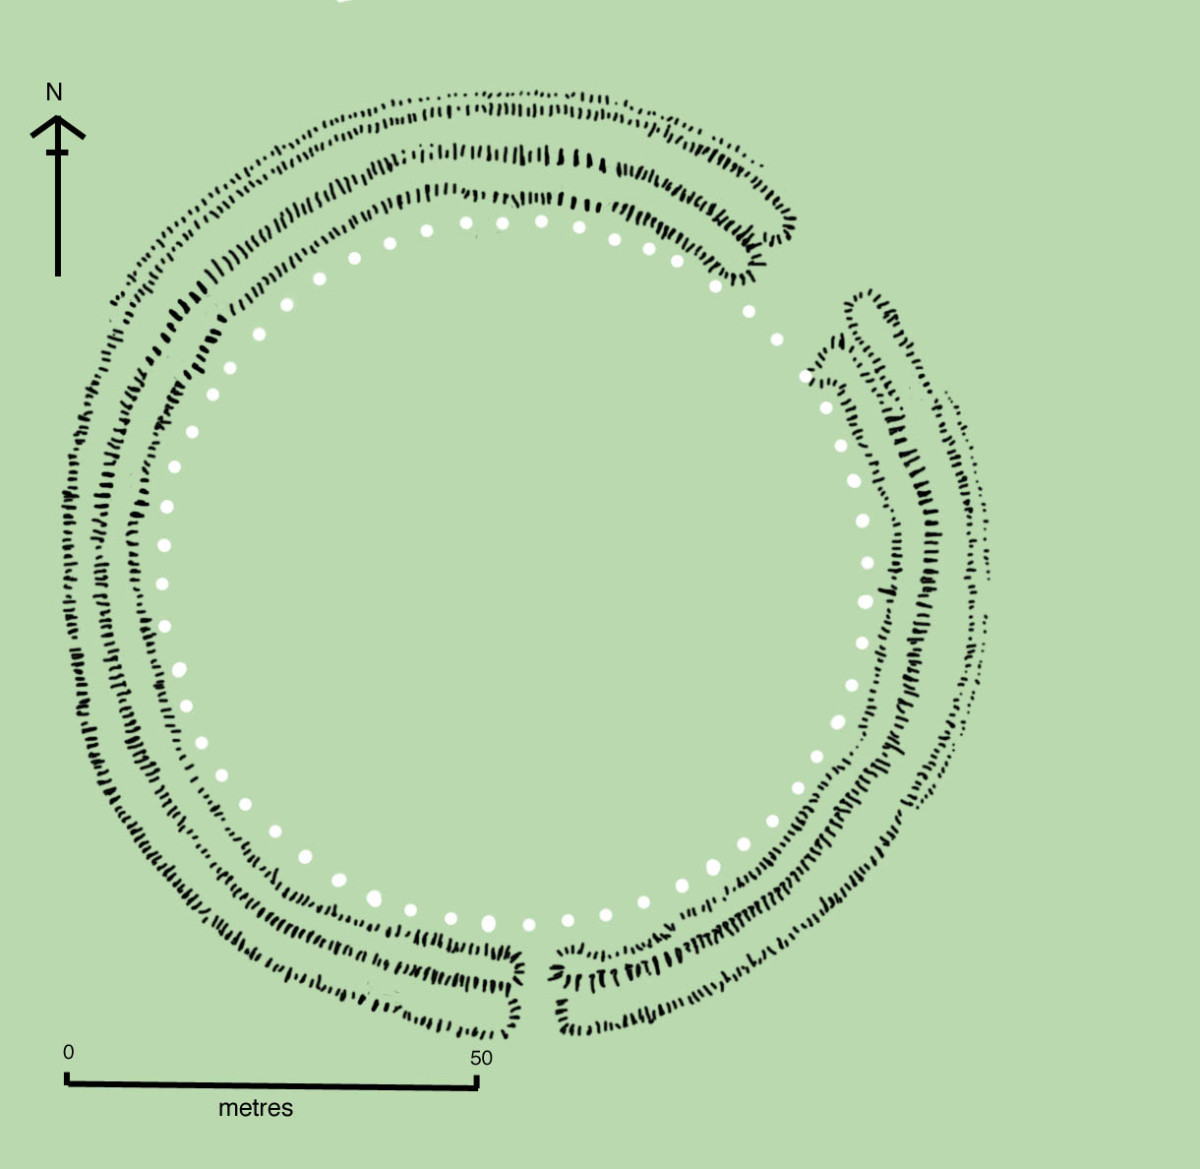 Plan of Phase I, with Aubrey holes in white